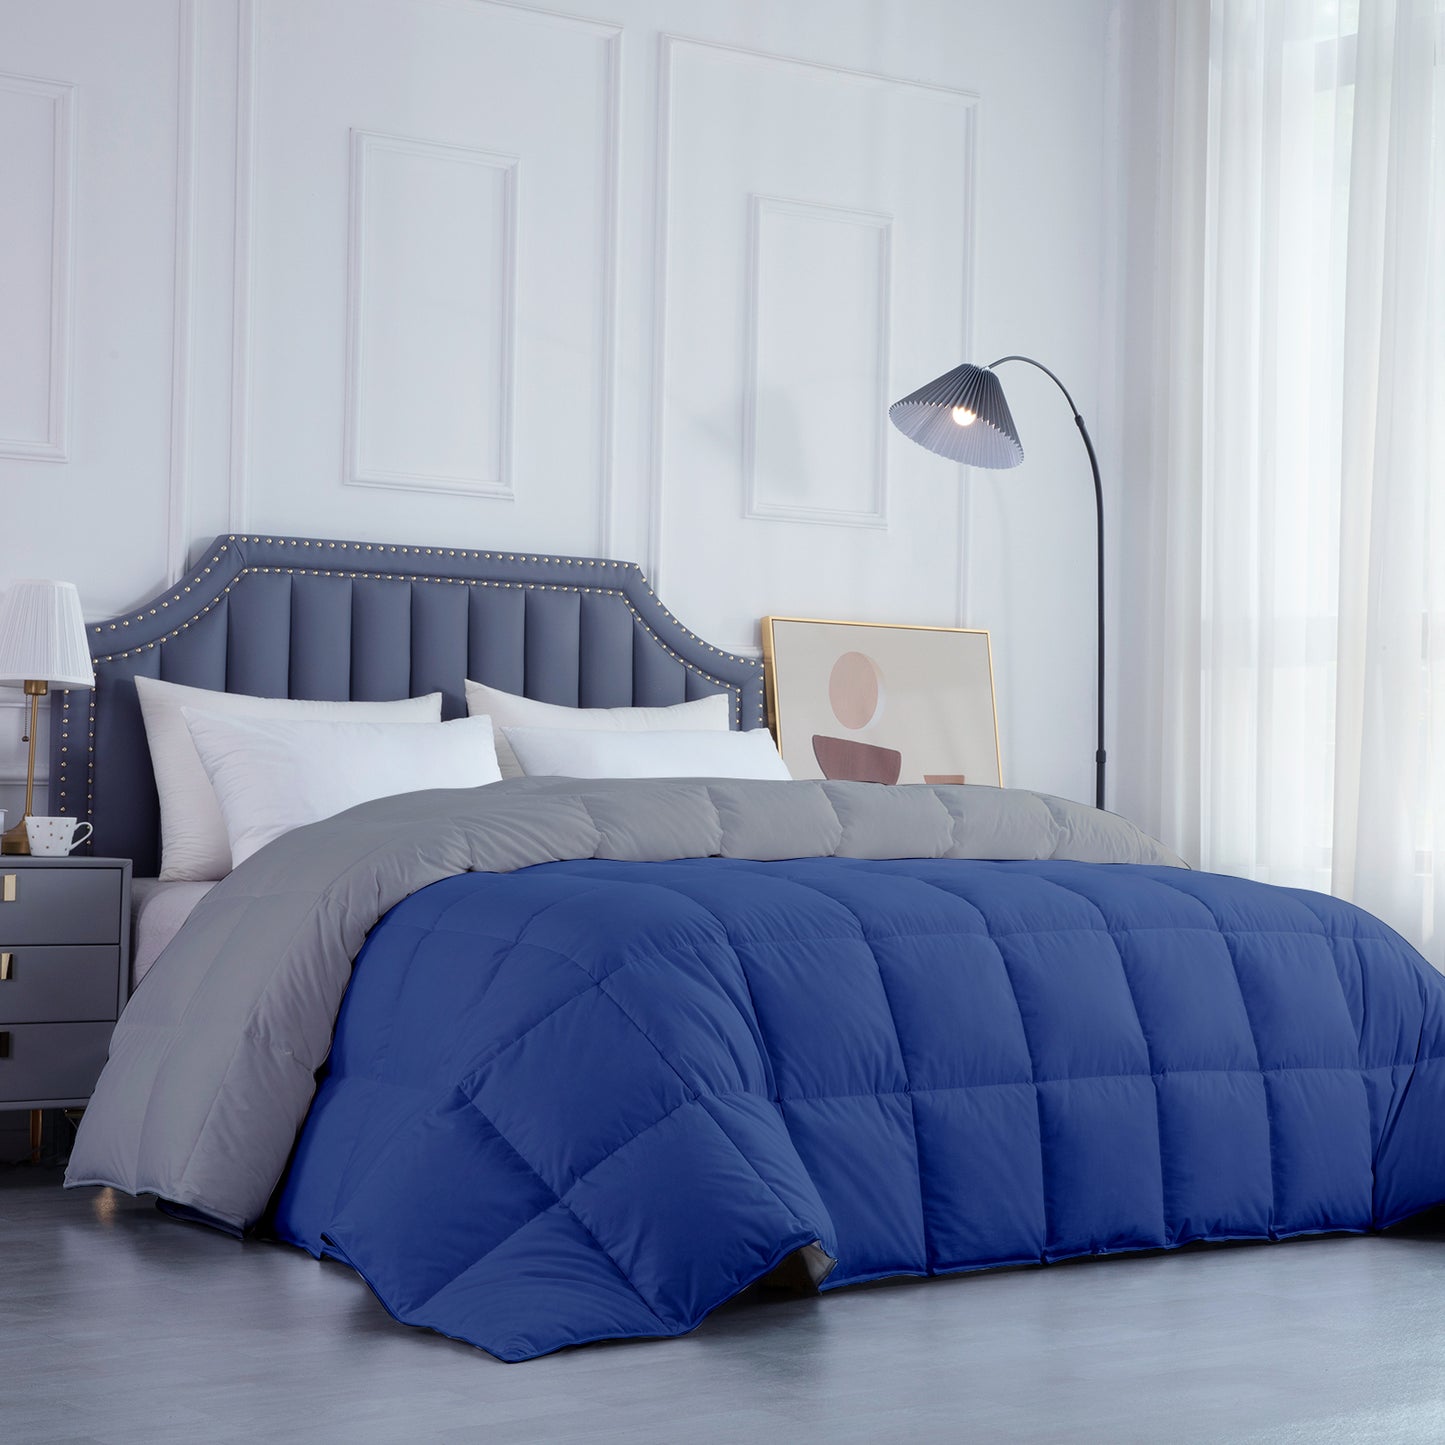 Razzai Down Alternative Soft Quilted 300 GSM All Weather Comforter |Silver/Medium Blue